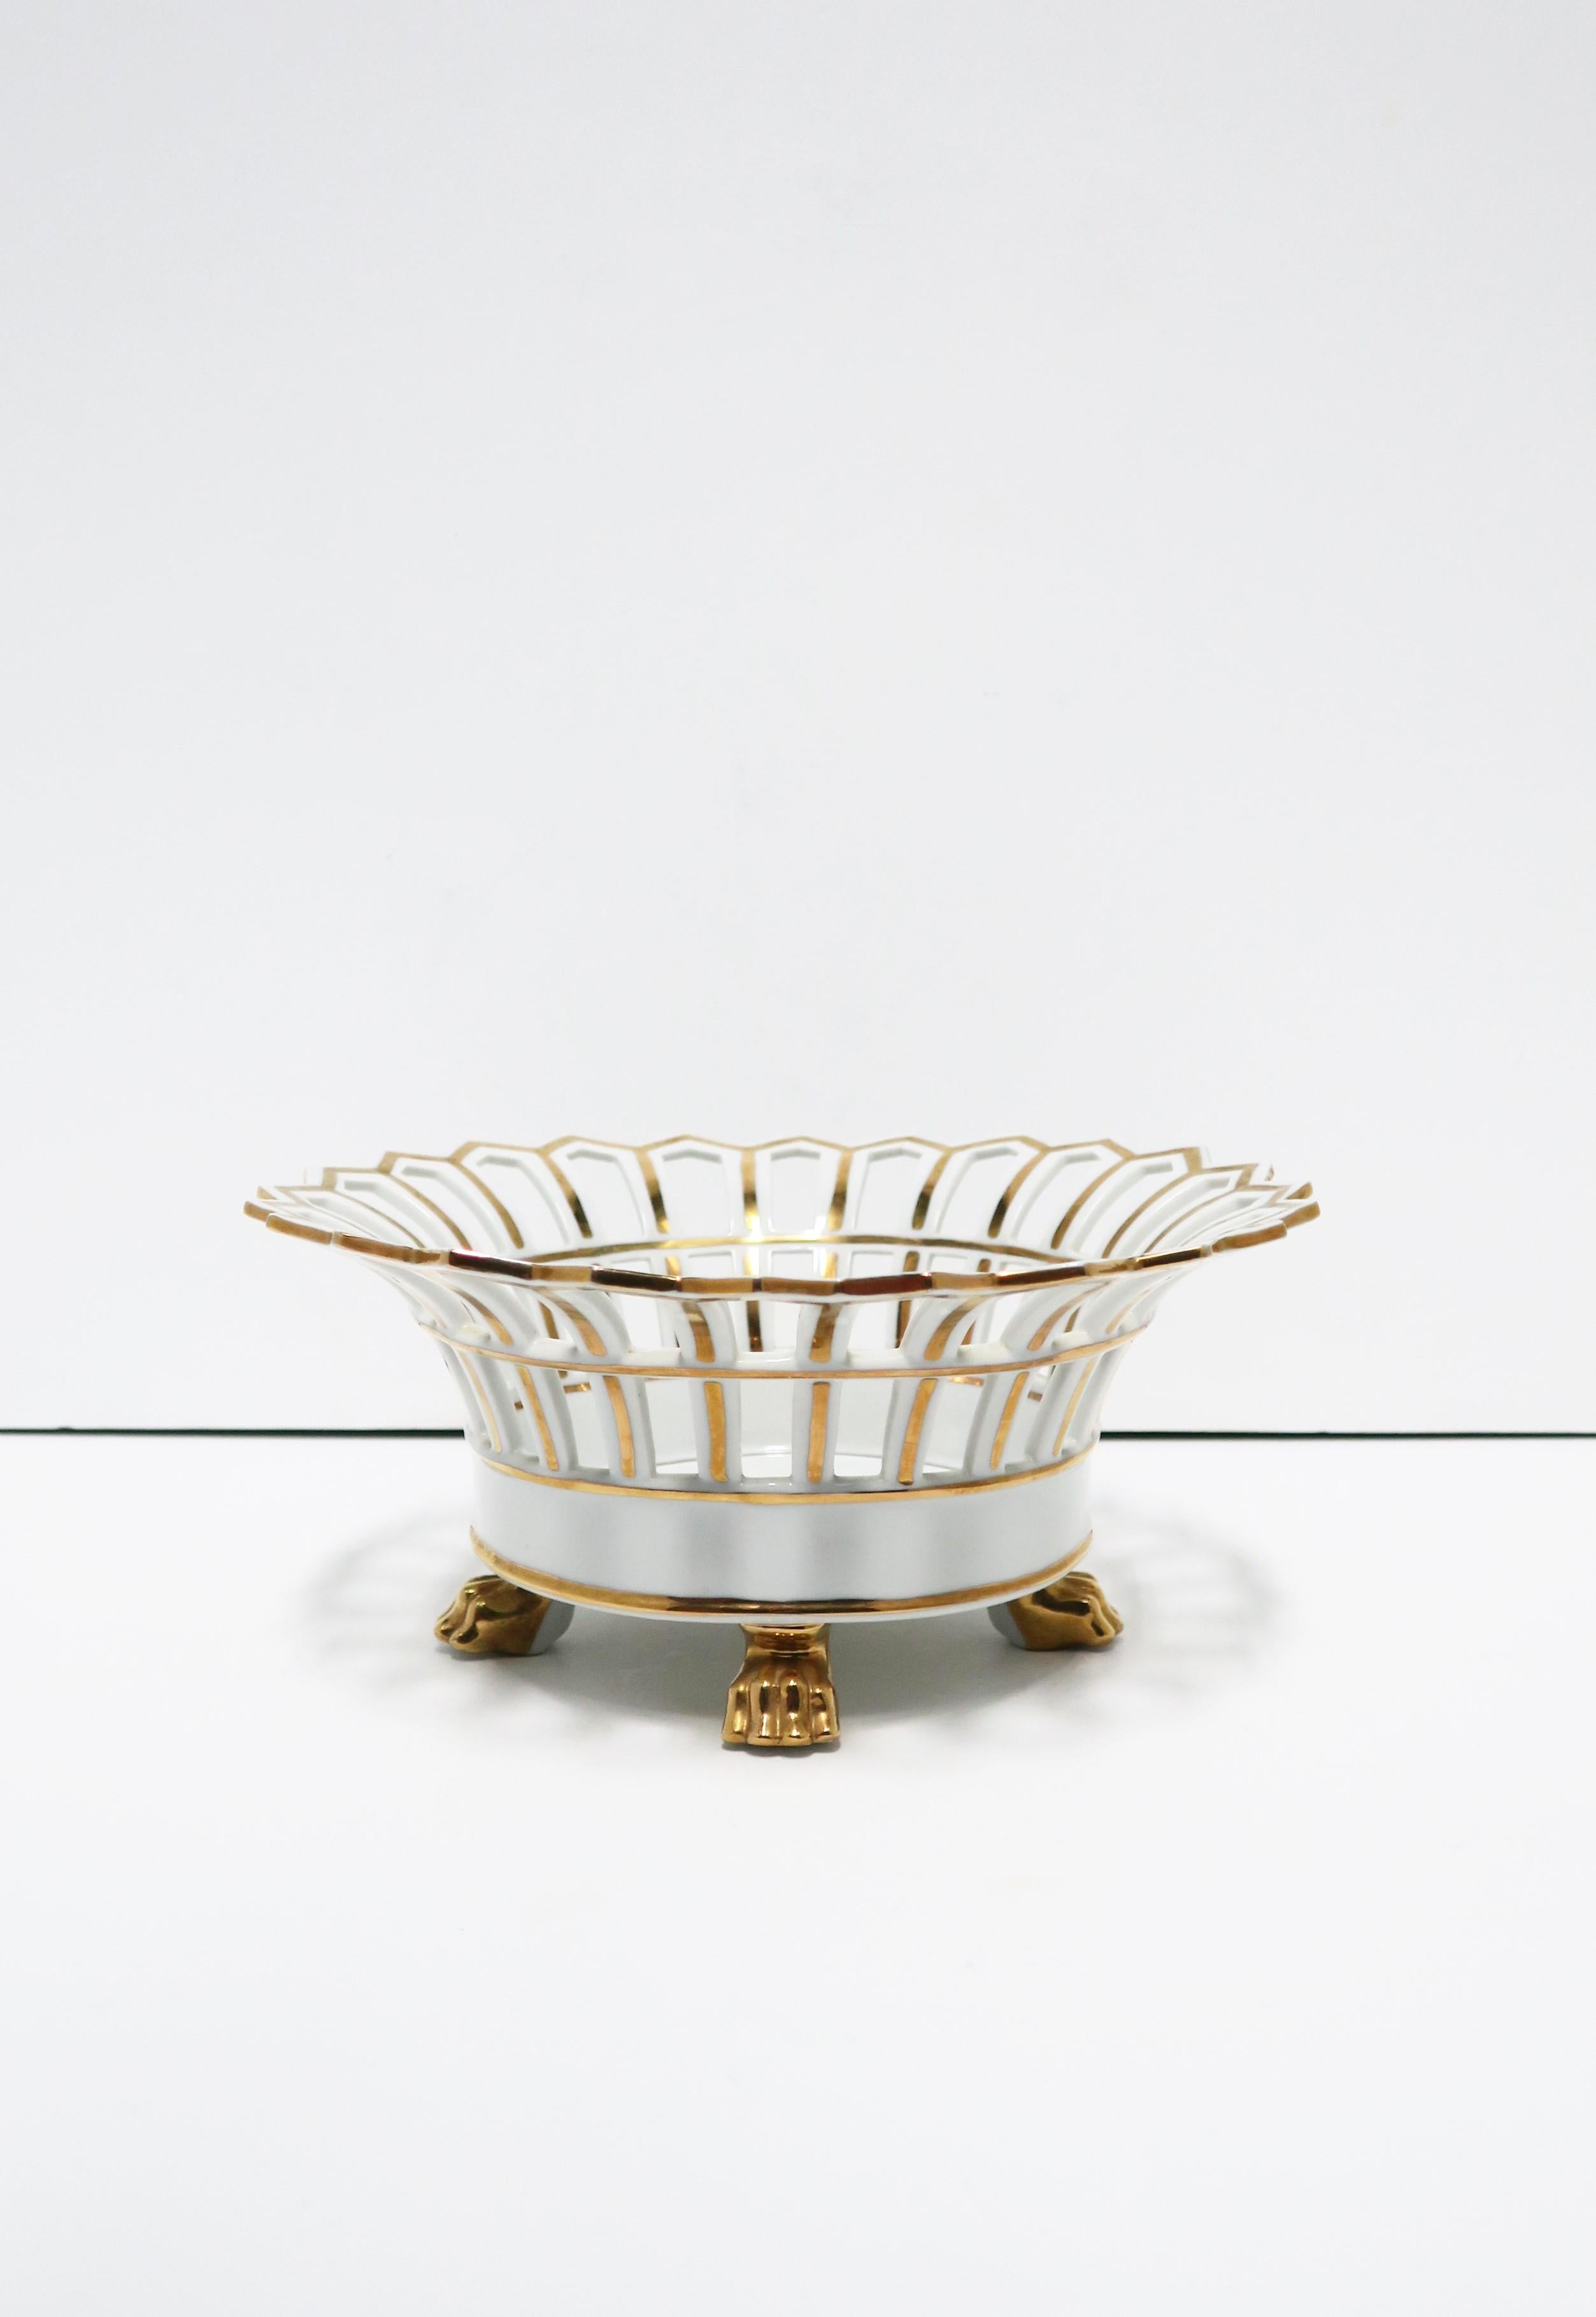 Empire French White and Gold Pierced Porcelain Compote Basket Centerpiece Bowl